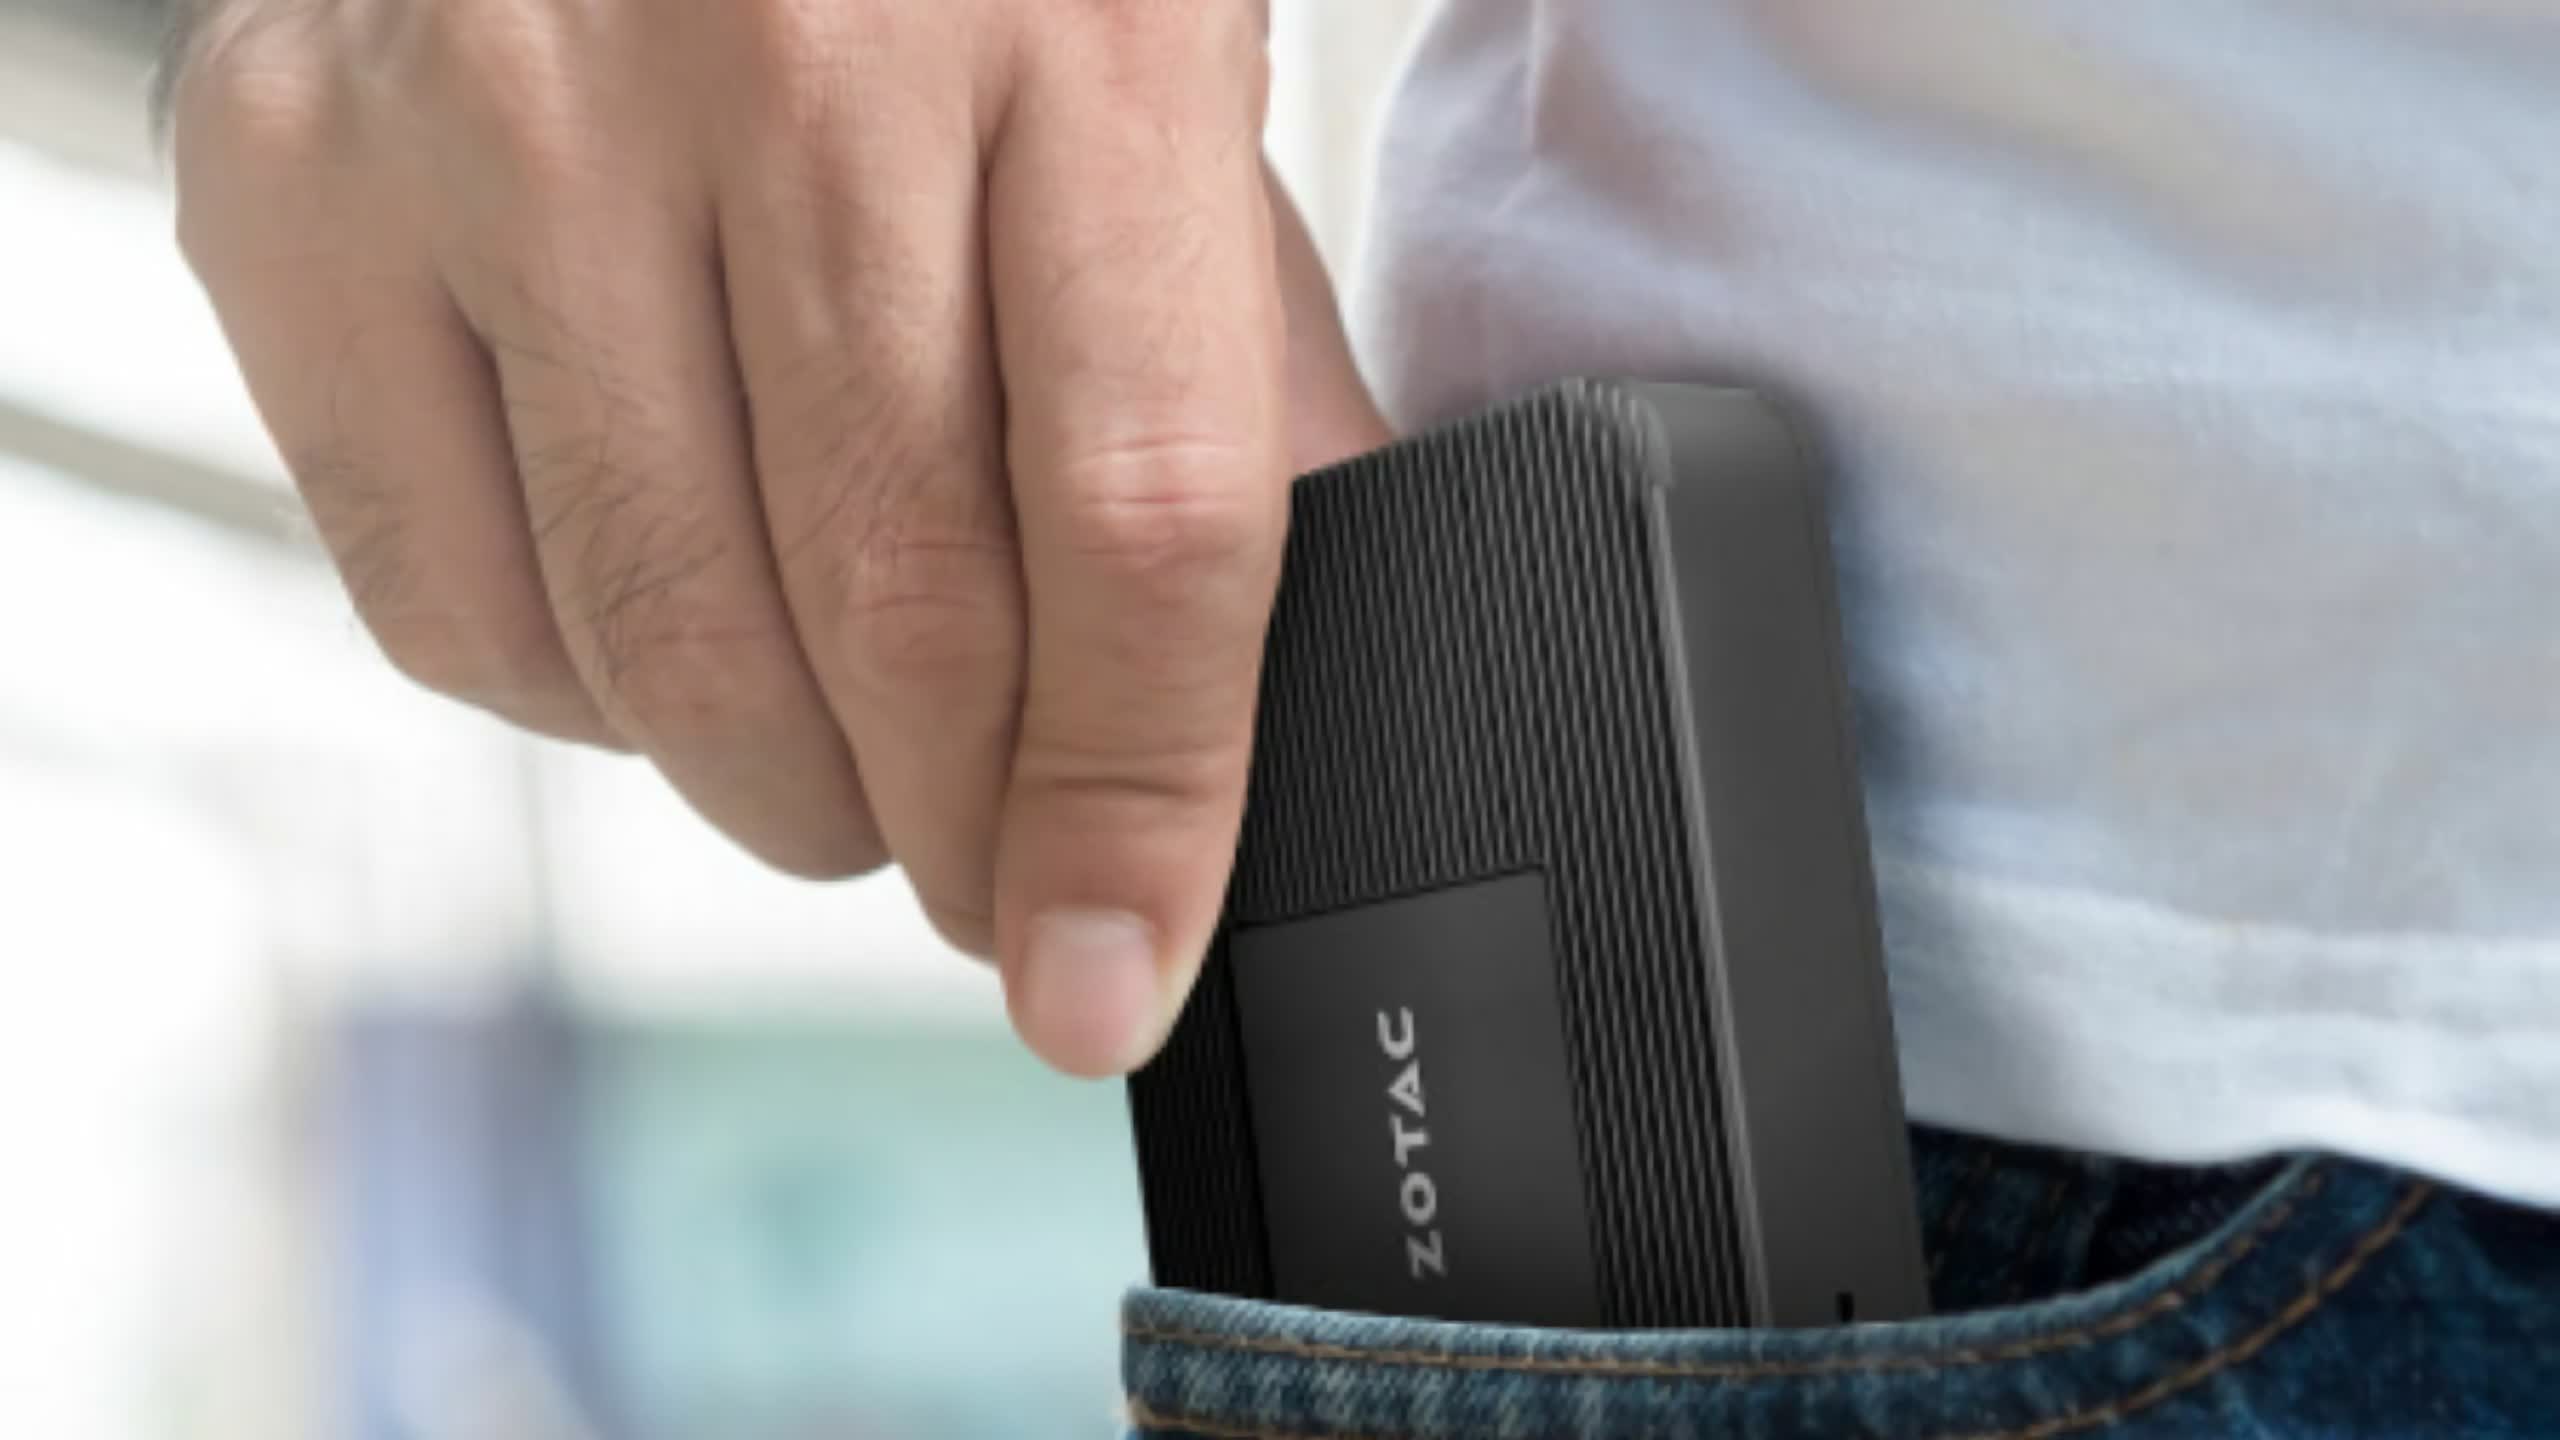 Zotac's minuscule Windows 11 Pro desktop PC is only slightly bigger than your phone